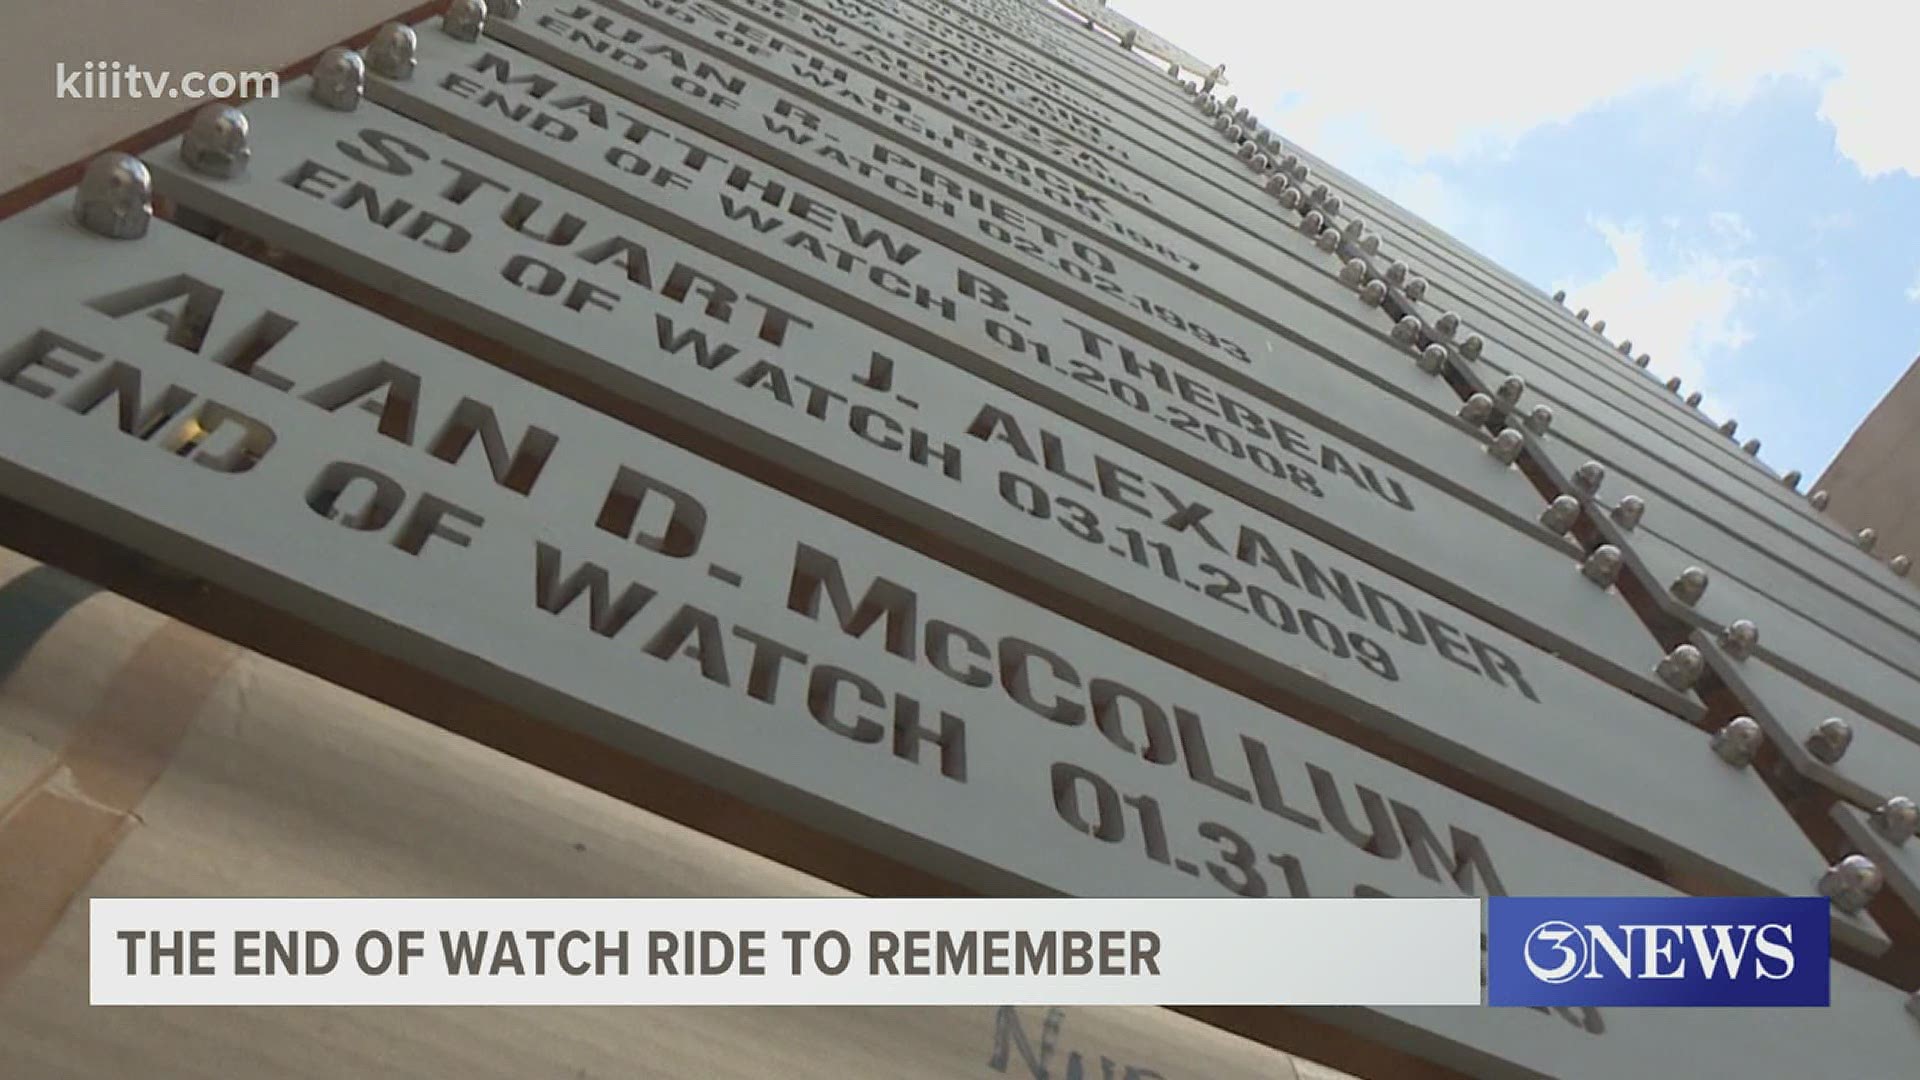 On Monday, June 14, the End of Watch Ride will stop at the Nueces County Fallen Heroes Memorial Wall, at Leopard and Artesian Streets, from 3 to 5 p.m.